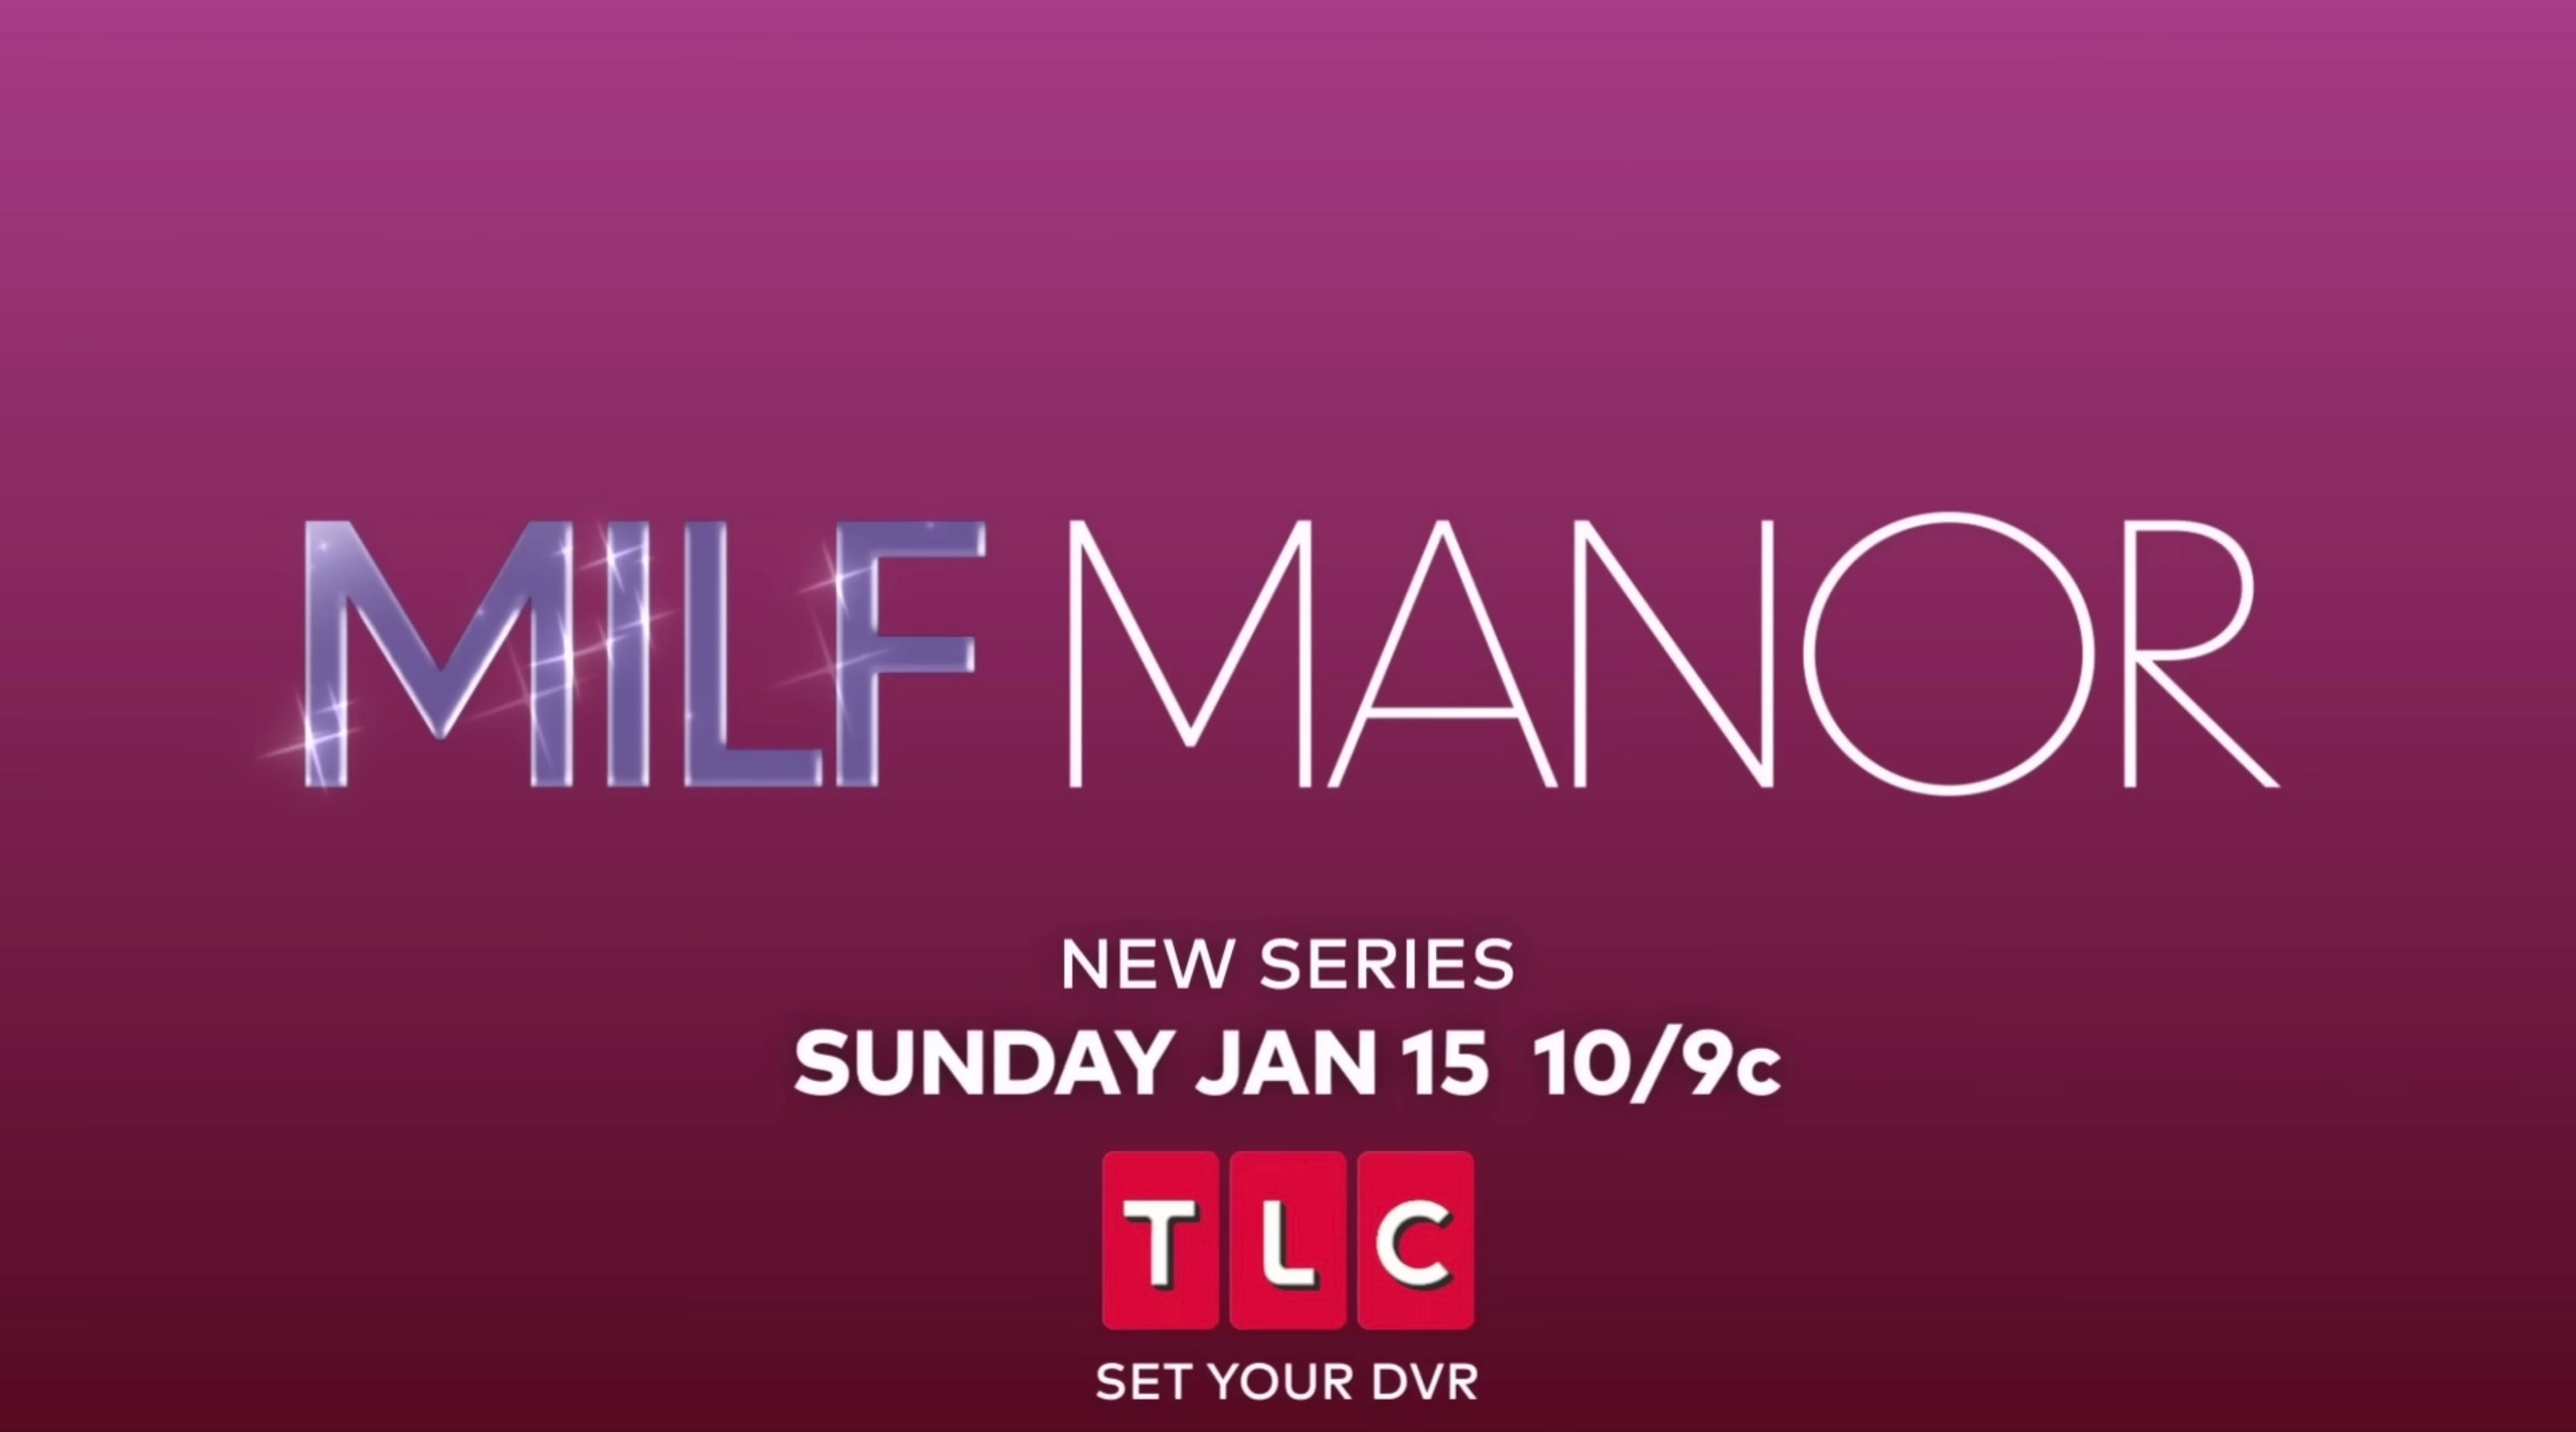 'Milf Manor' included a gross twist in the debut episode that shocked fans. Here the 'Milf Manor' logo is seen with a pinkish purple background.